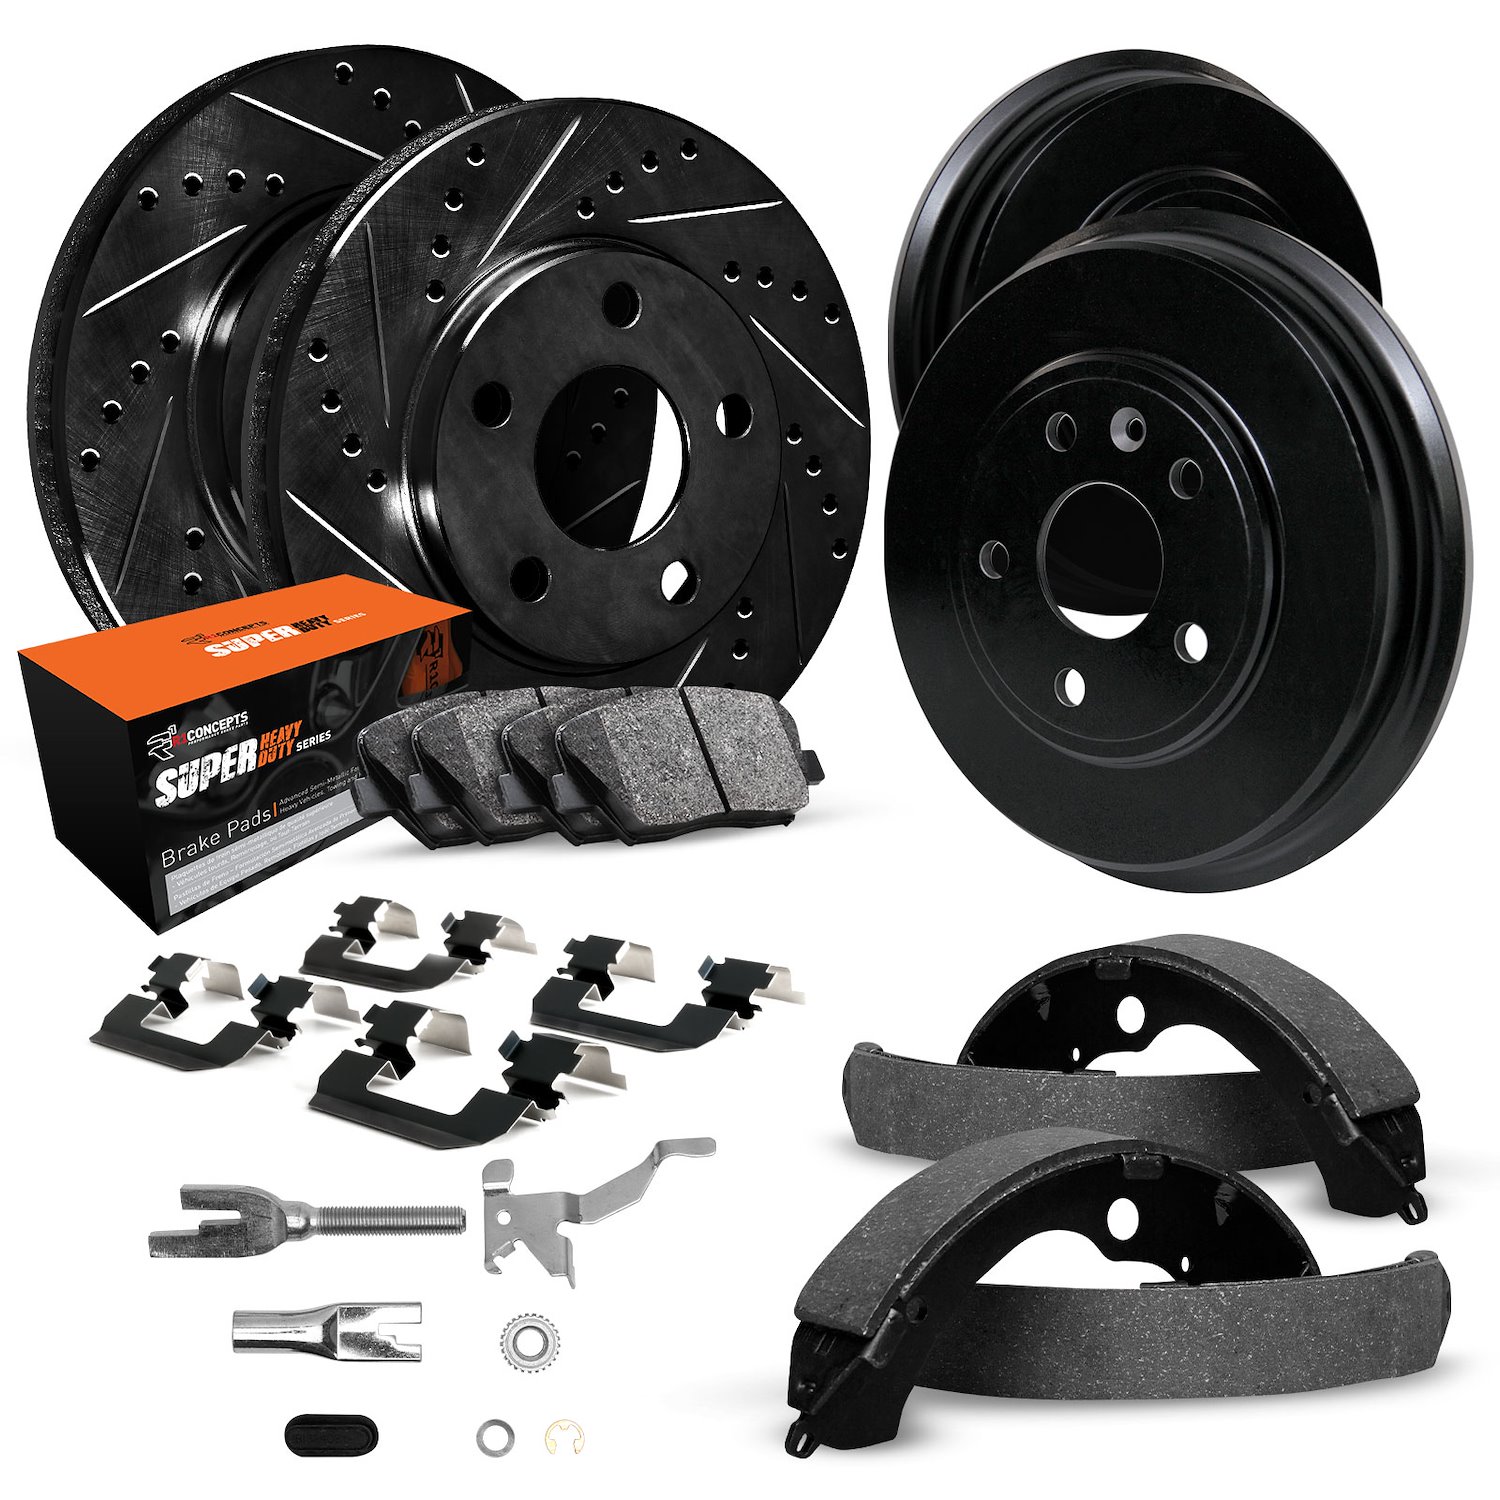 E-Line Slotted Black Brake Rotor & Drum Set w/Super-Duty Pads, Shoes, Hardware/Adjusters, 1989-1989 Ford/Lincoln/Mercury/Mazda